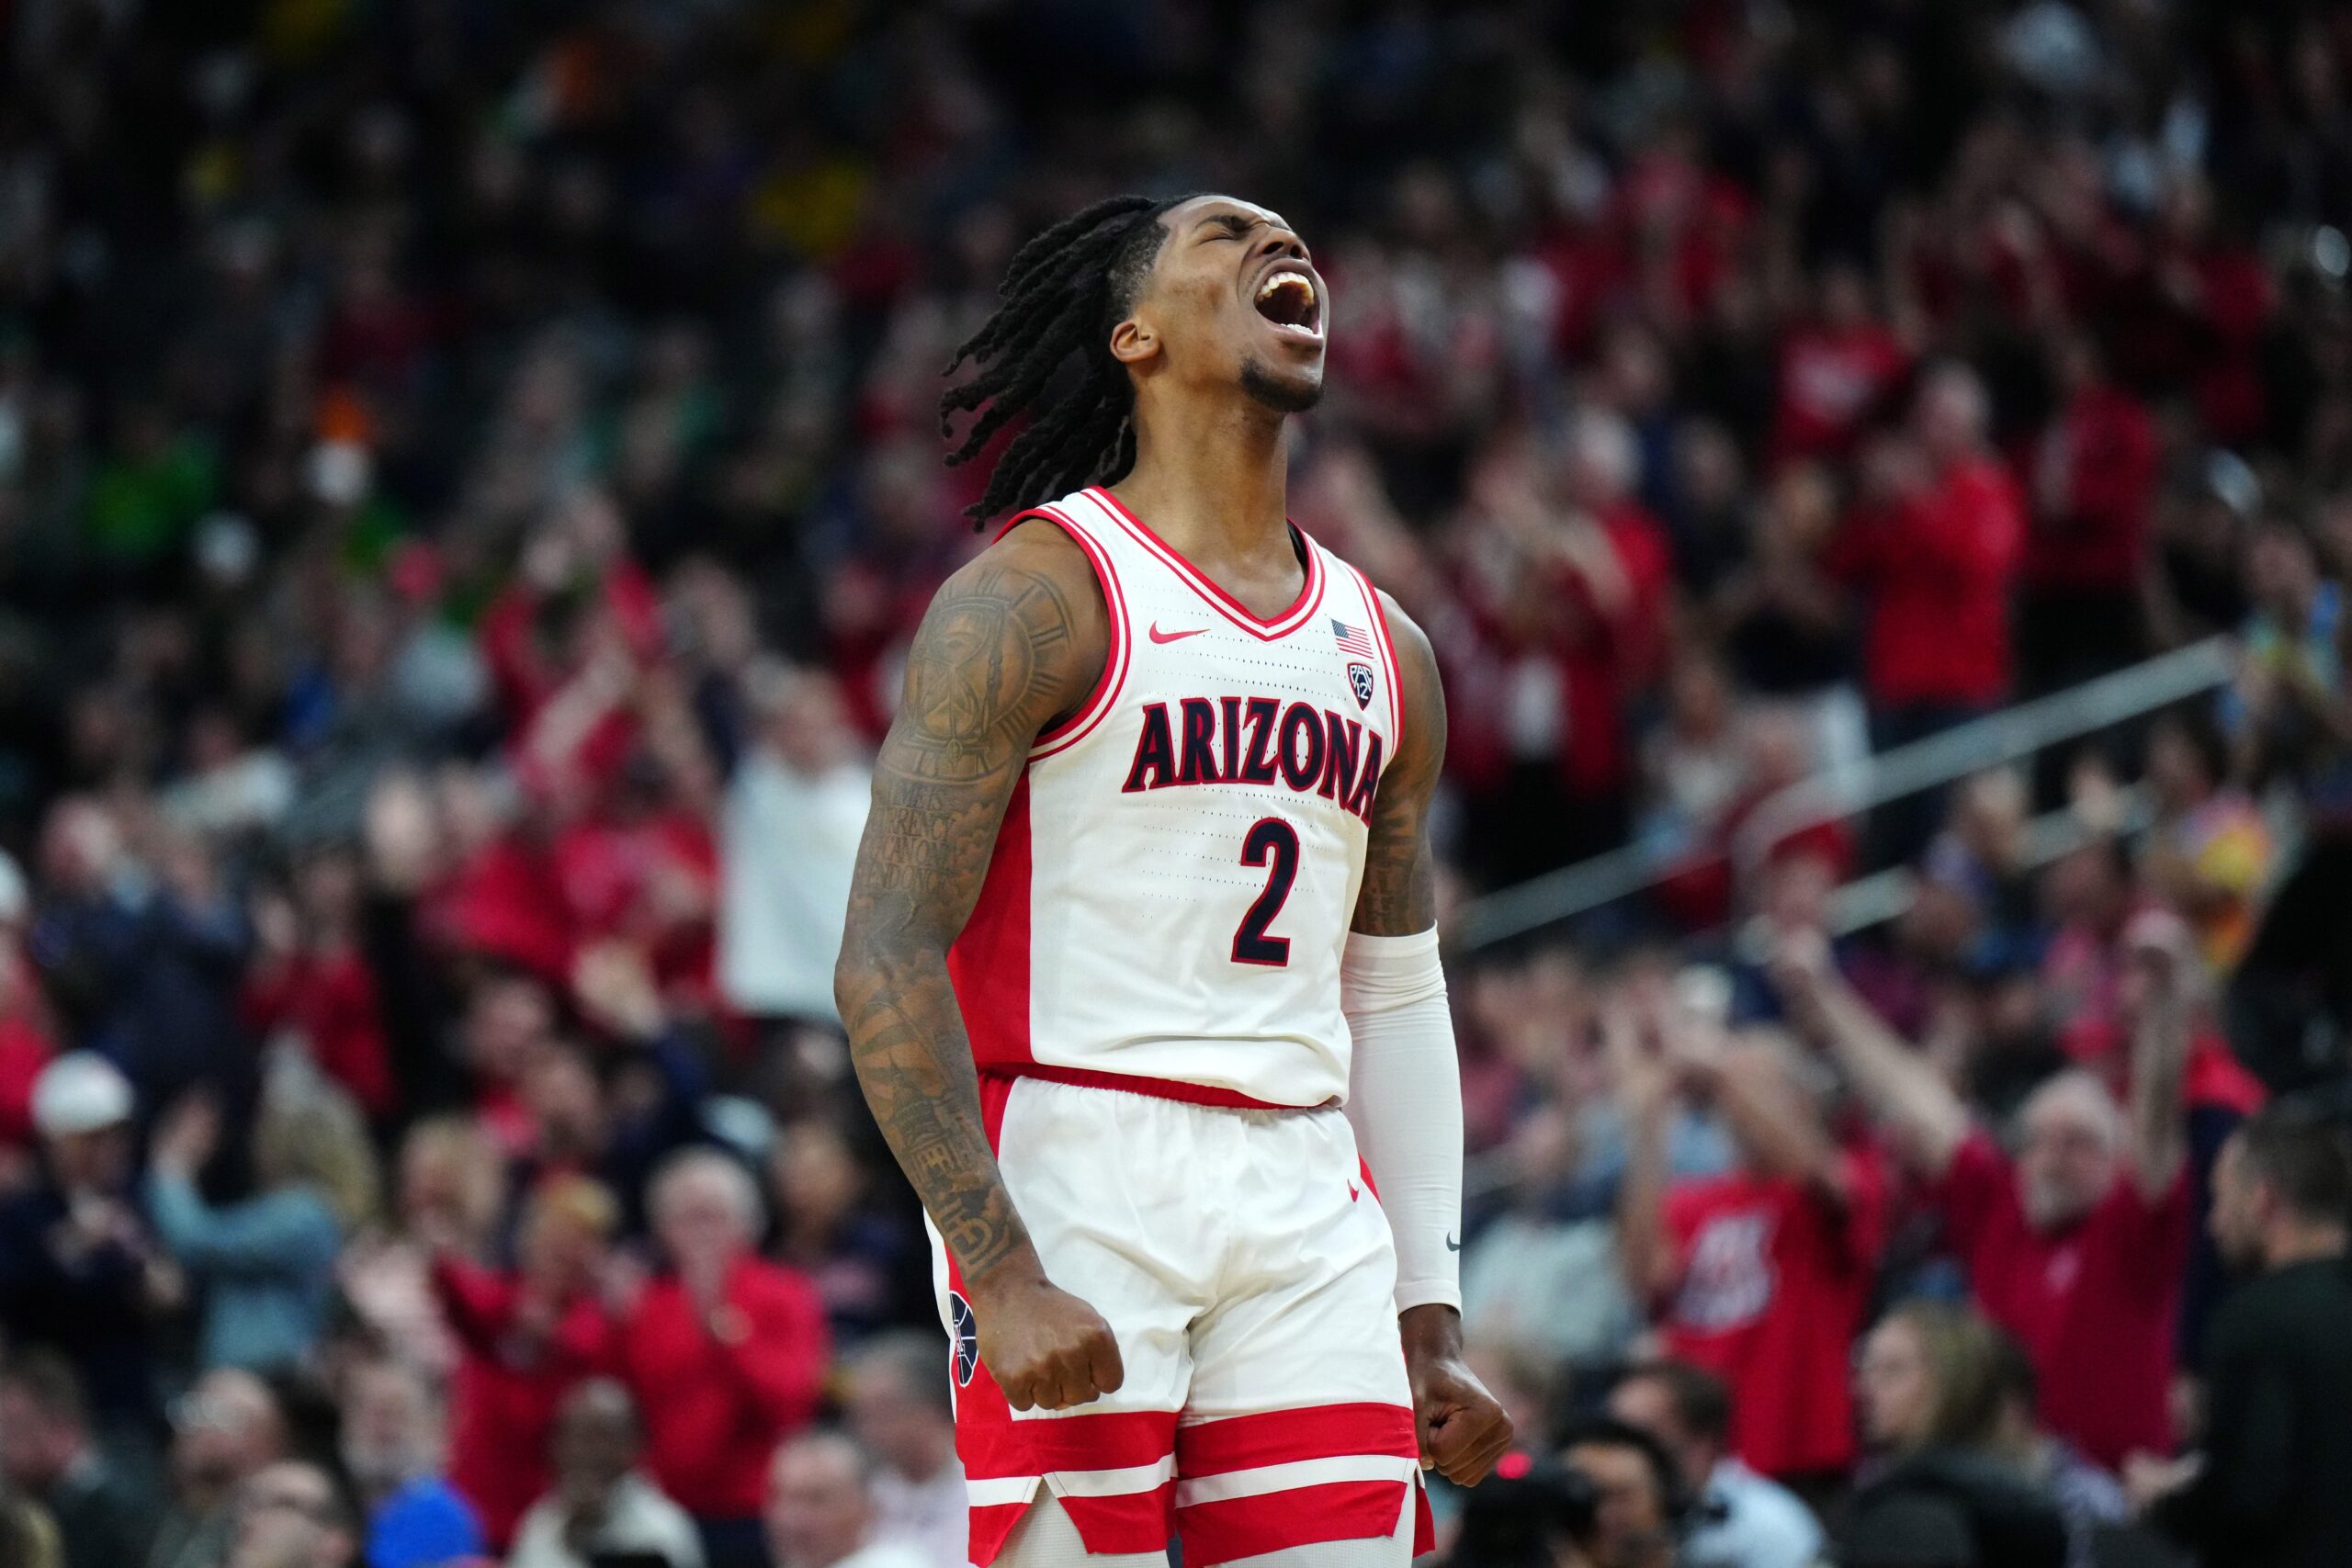 Arizona Wildcats guard Caleb Love (2) celebrates against the Southern California Trojans in the second half at T-Mobile Arena. Mandatory Credit: Kirby Lee-USA TODAY Sports